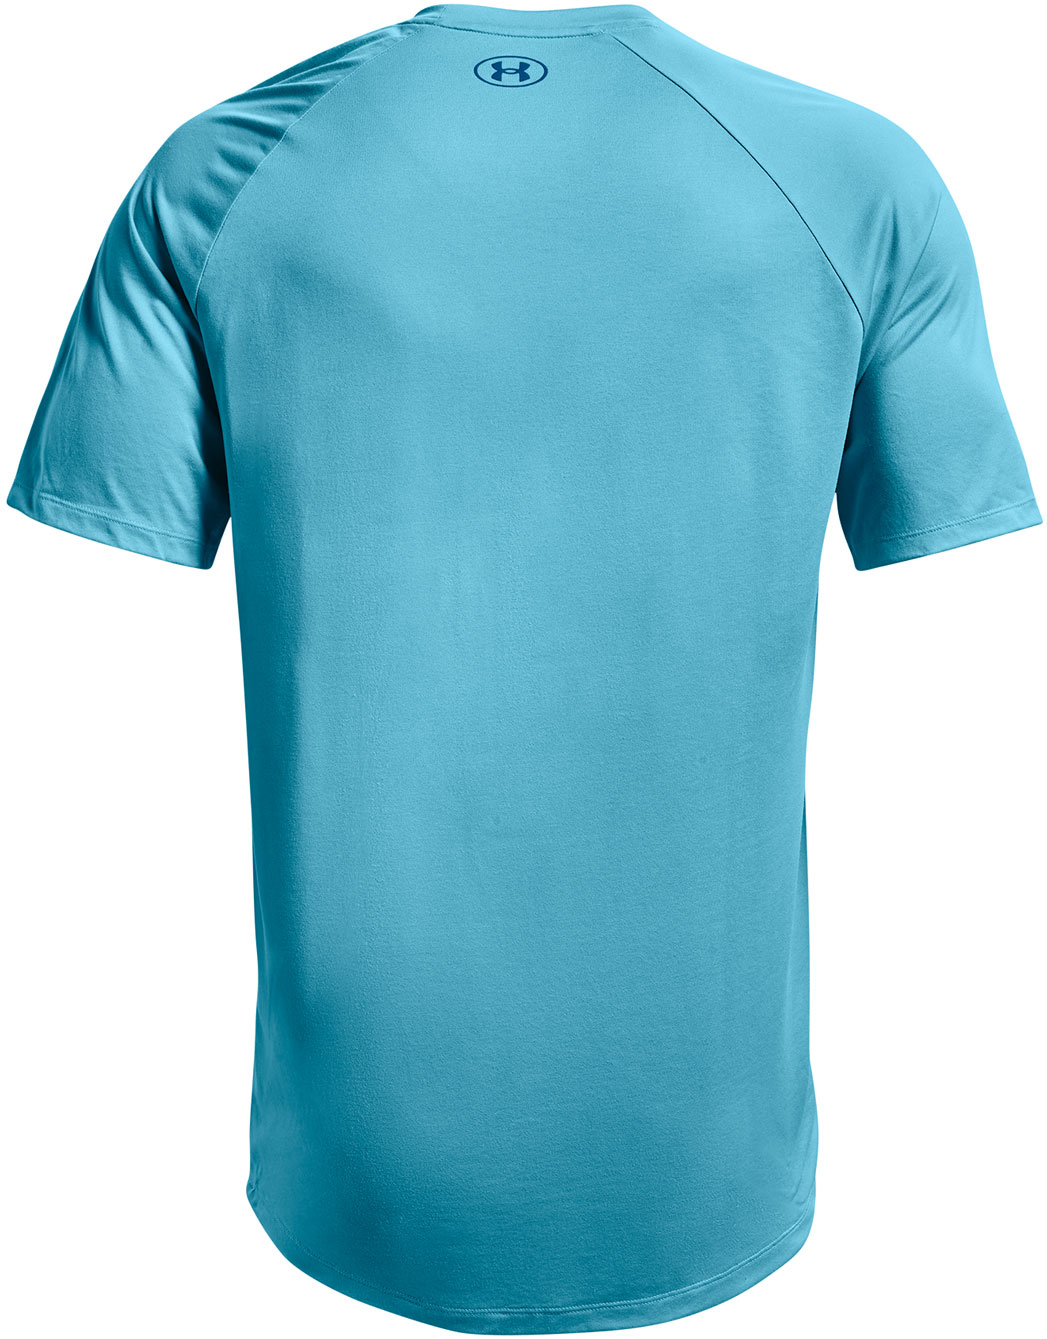 Men’s T-shirt with short sleeves